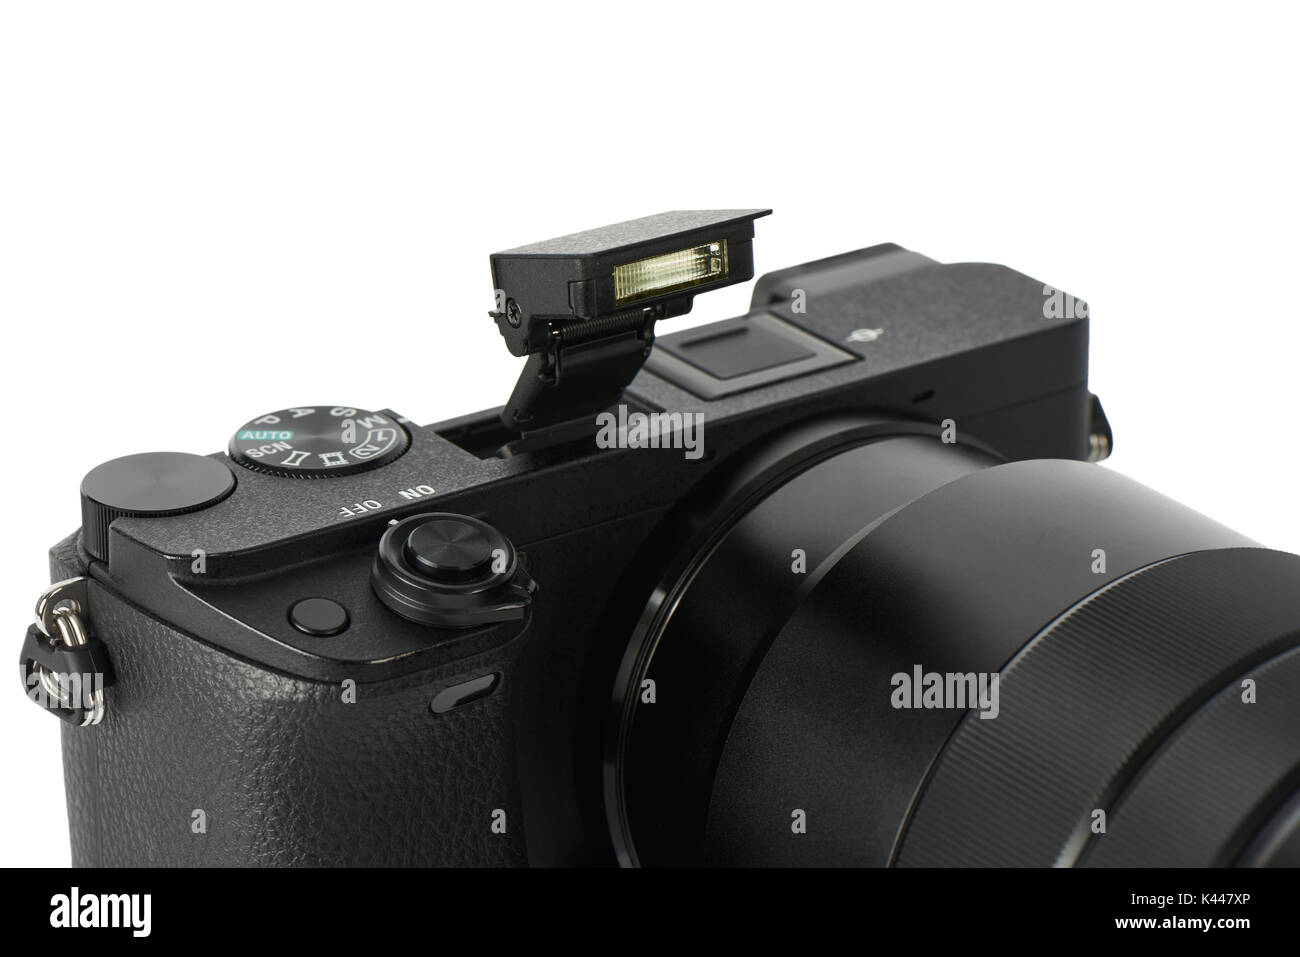 Closeup of pop-up flash on a mirrorless interchangeable lens camera with zoom lens Stock Photo